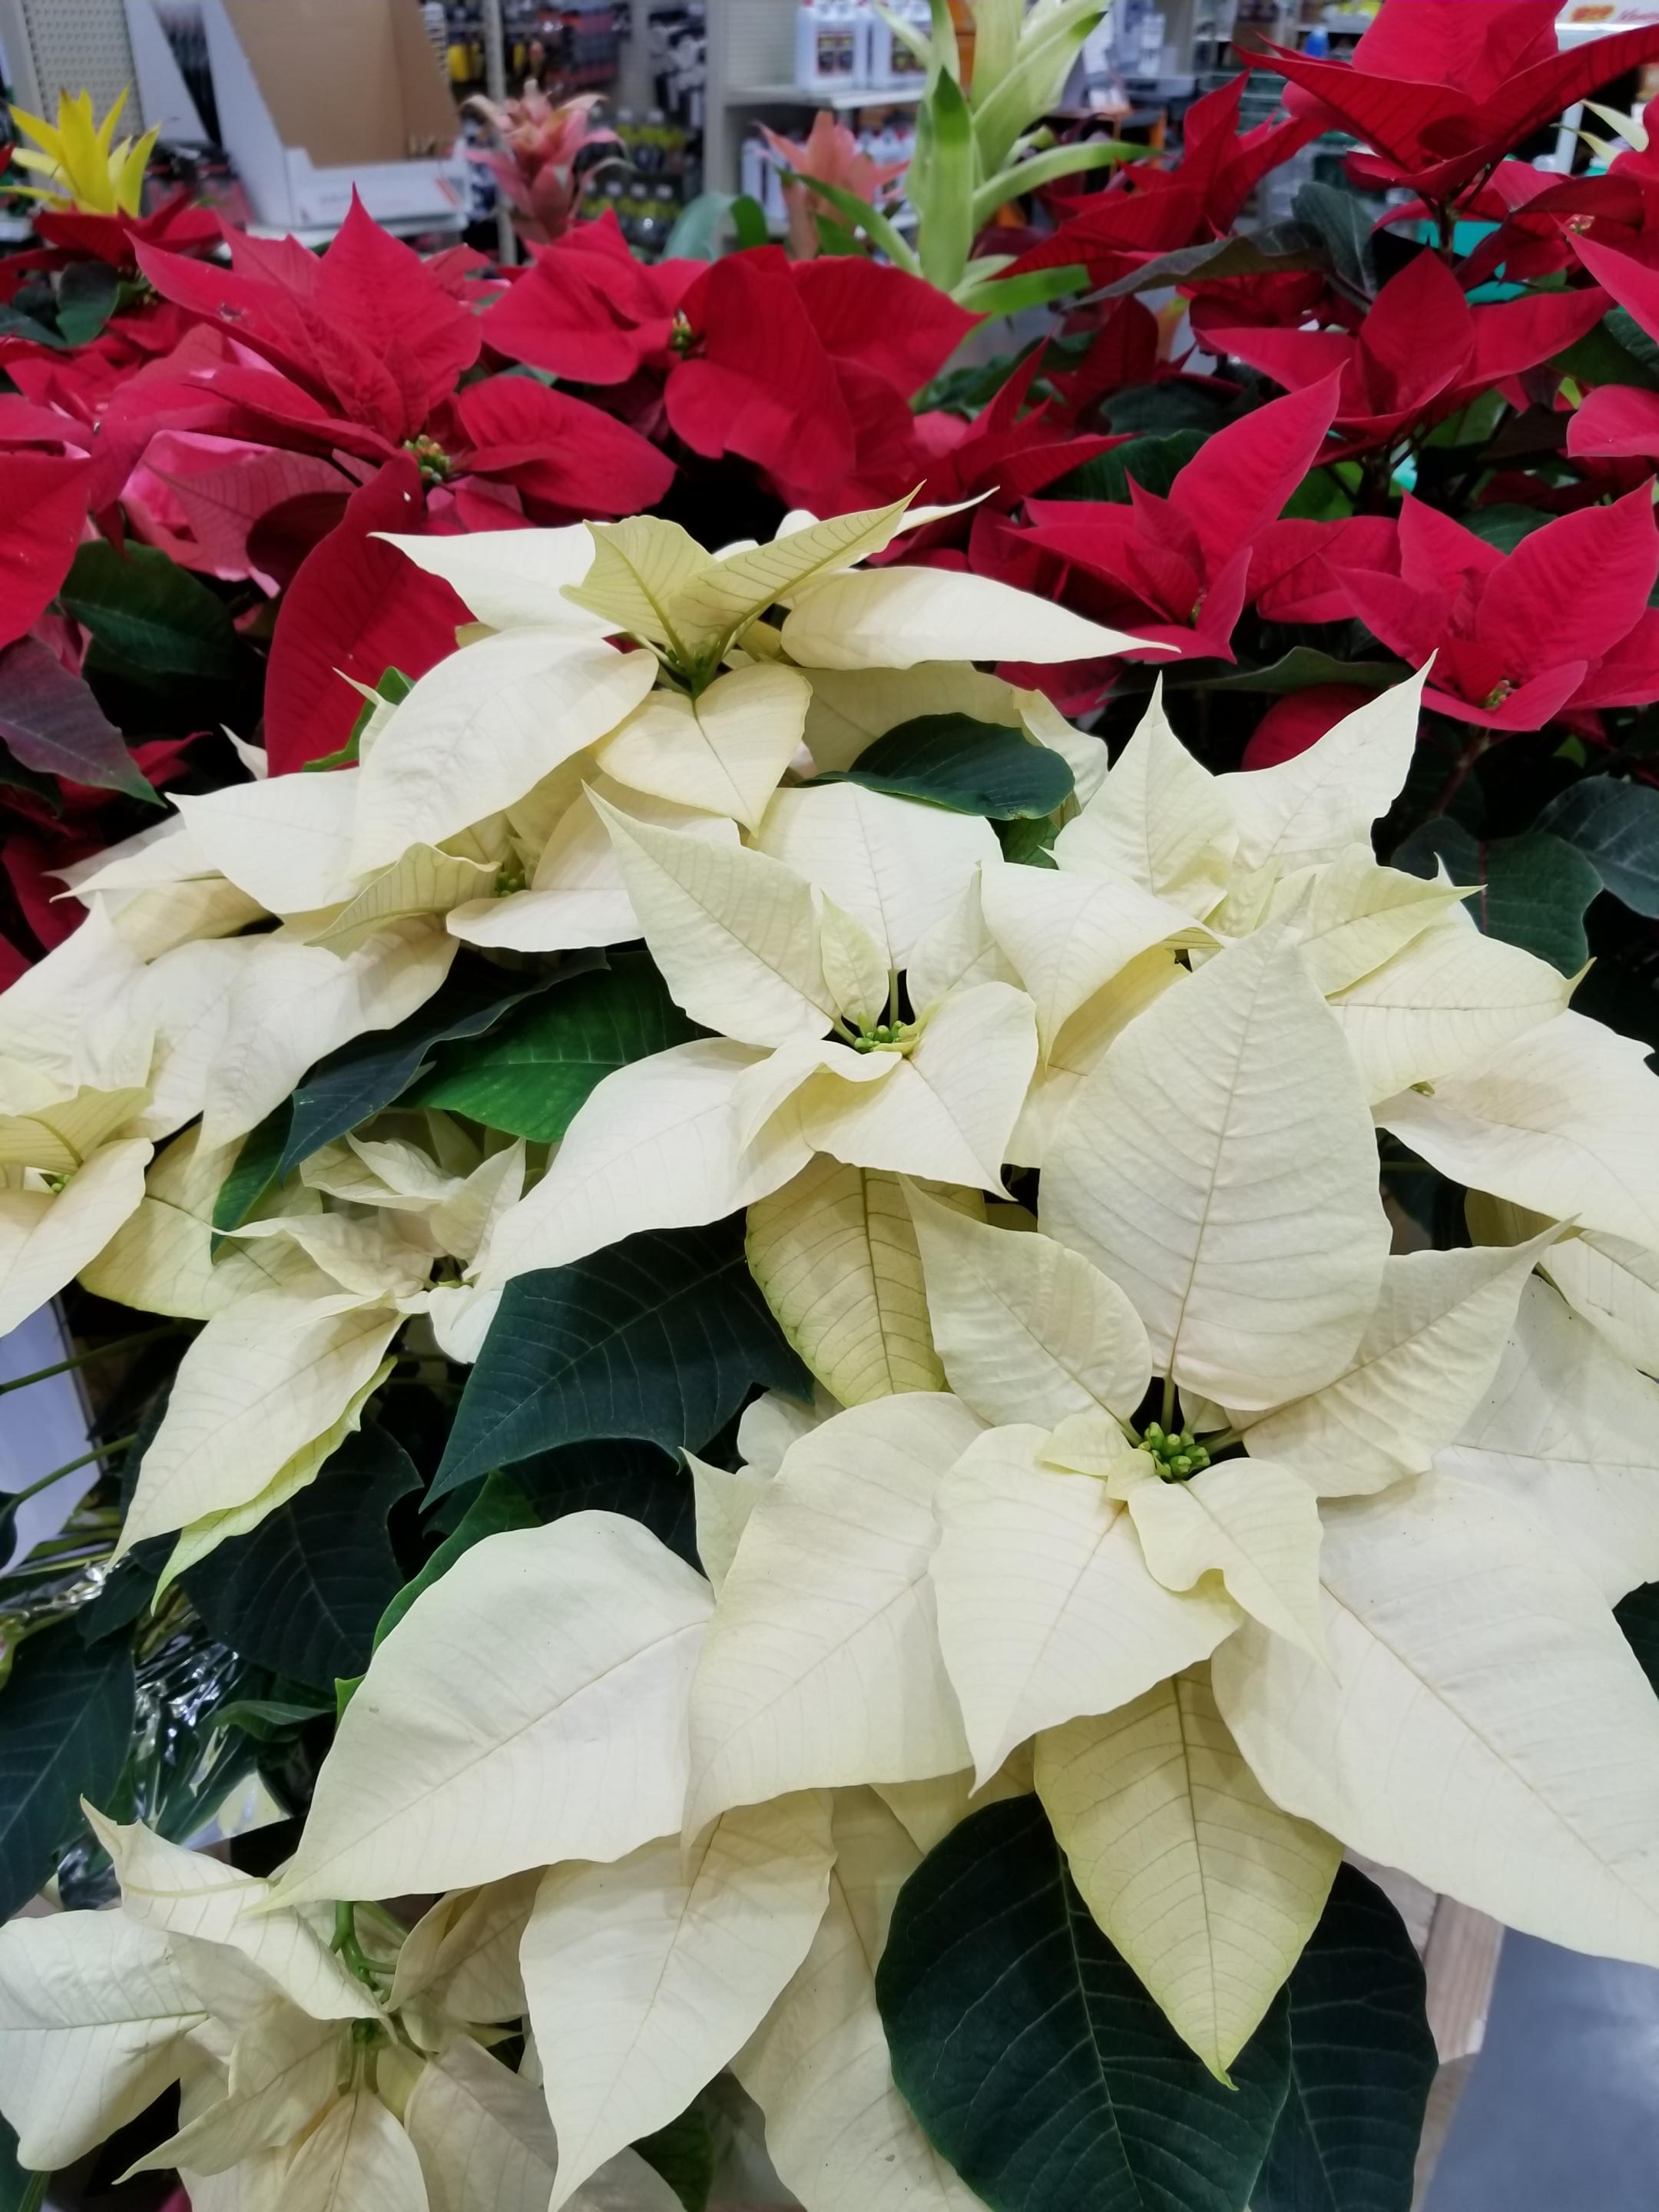 Growing And Caring For Poinsettia Umn Extension,What Are Potstickers Wrapped In